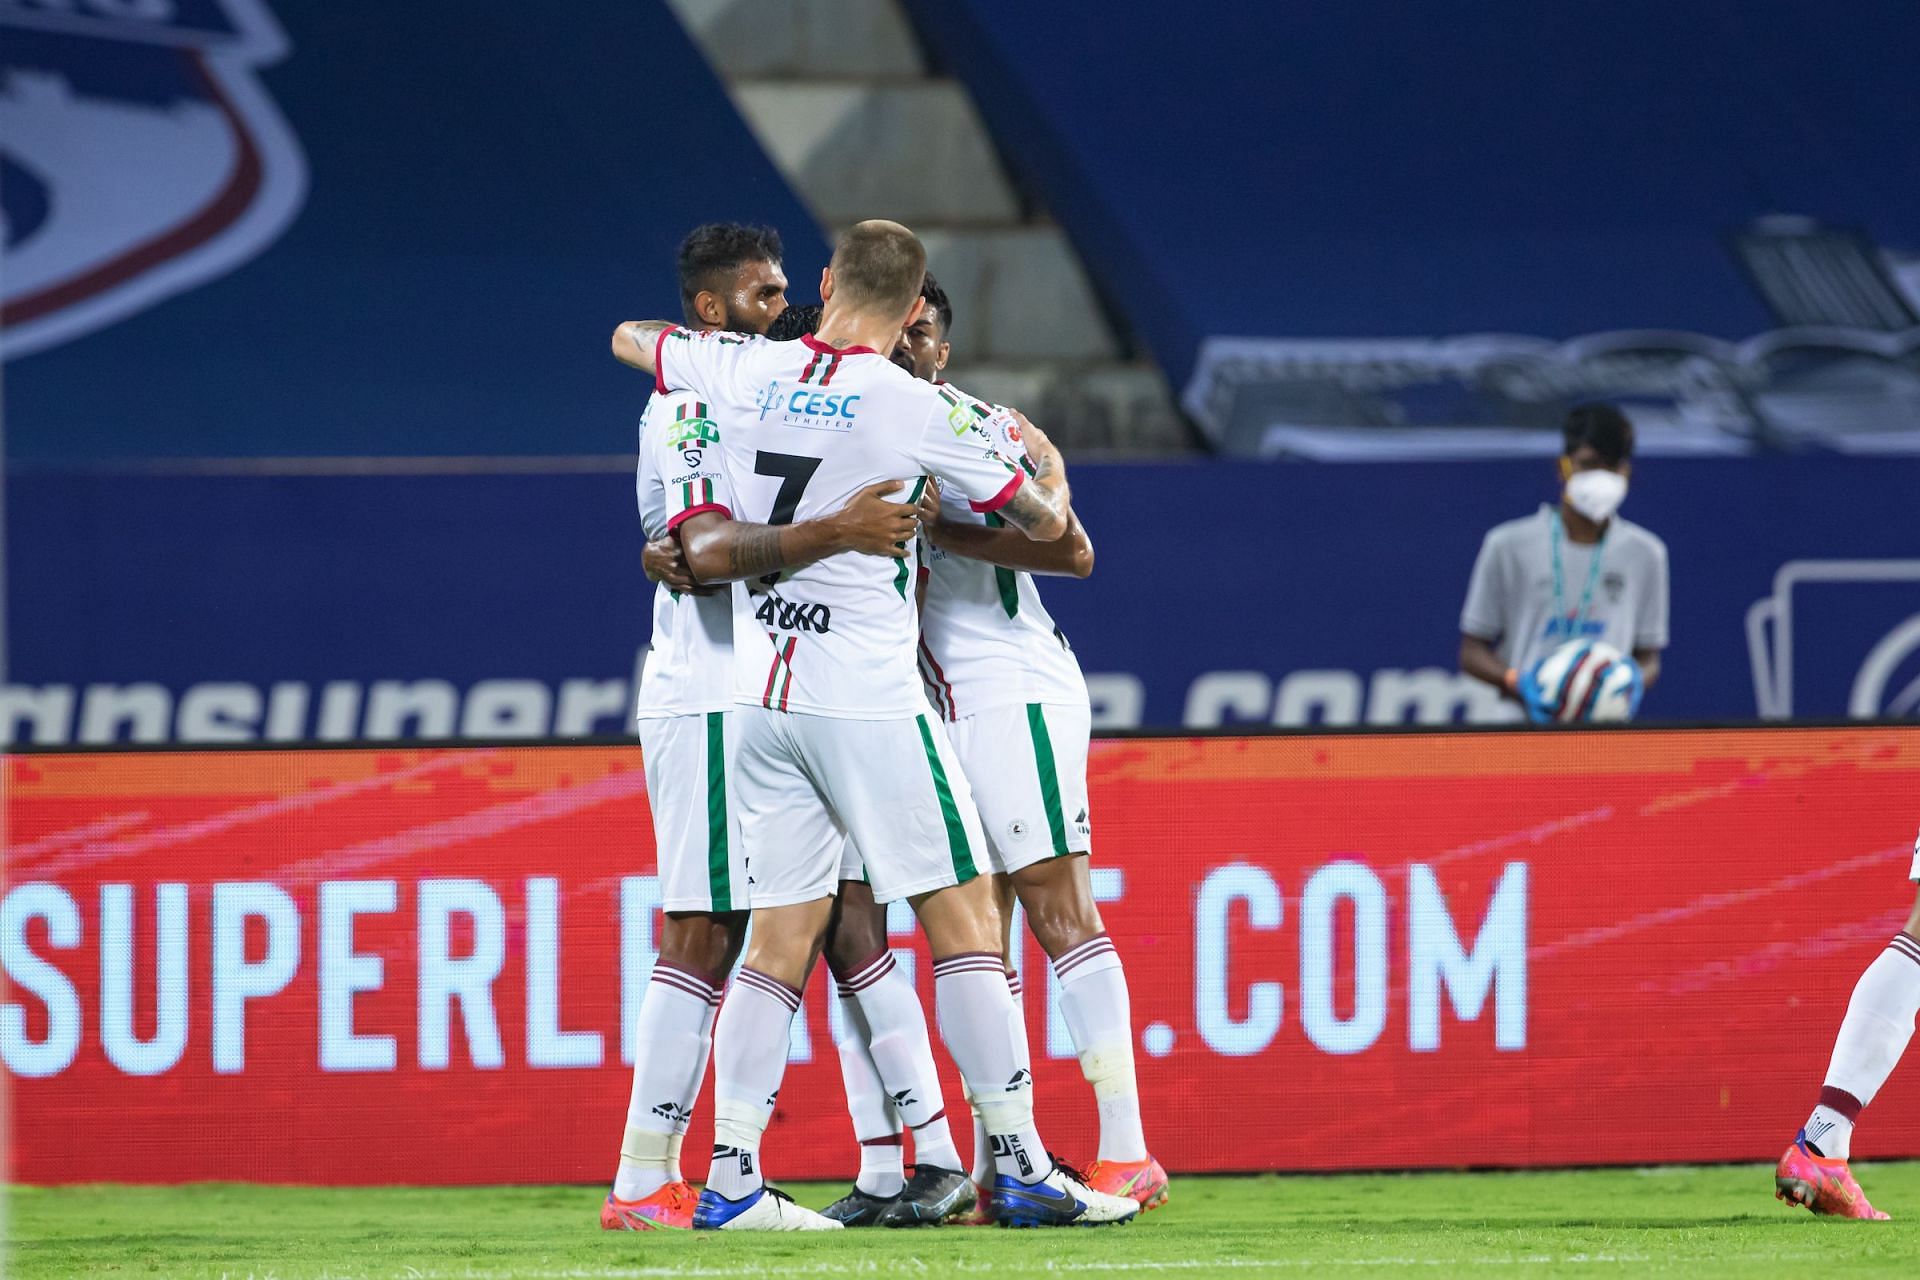 ATK Mohun Bagan players celebrate their first goal of the game (Image Courtesy: ISL)